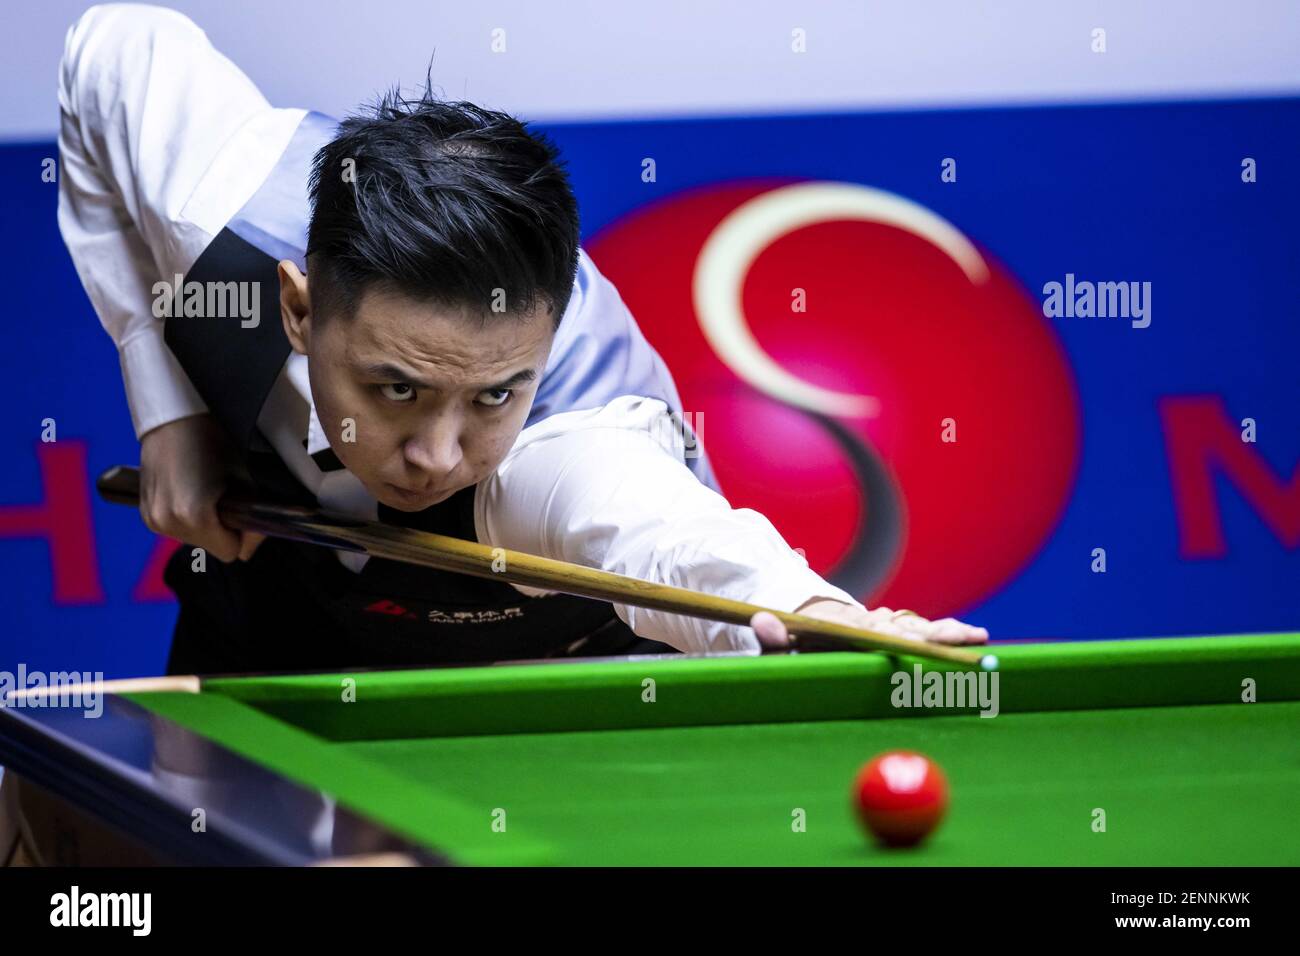 Chinese professional snooker player Xiao Guodong plays a shot at the Frist Round of 2019 Snooker Shanghai Masters in Shanghai, China, 9 September 2019